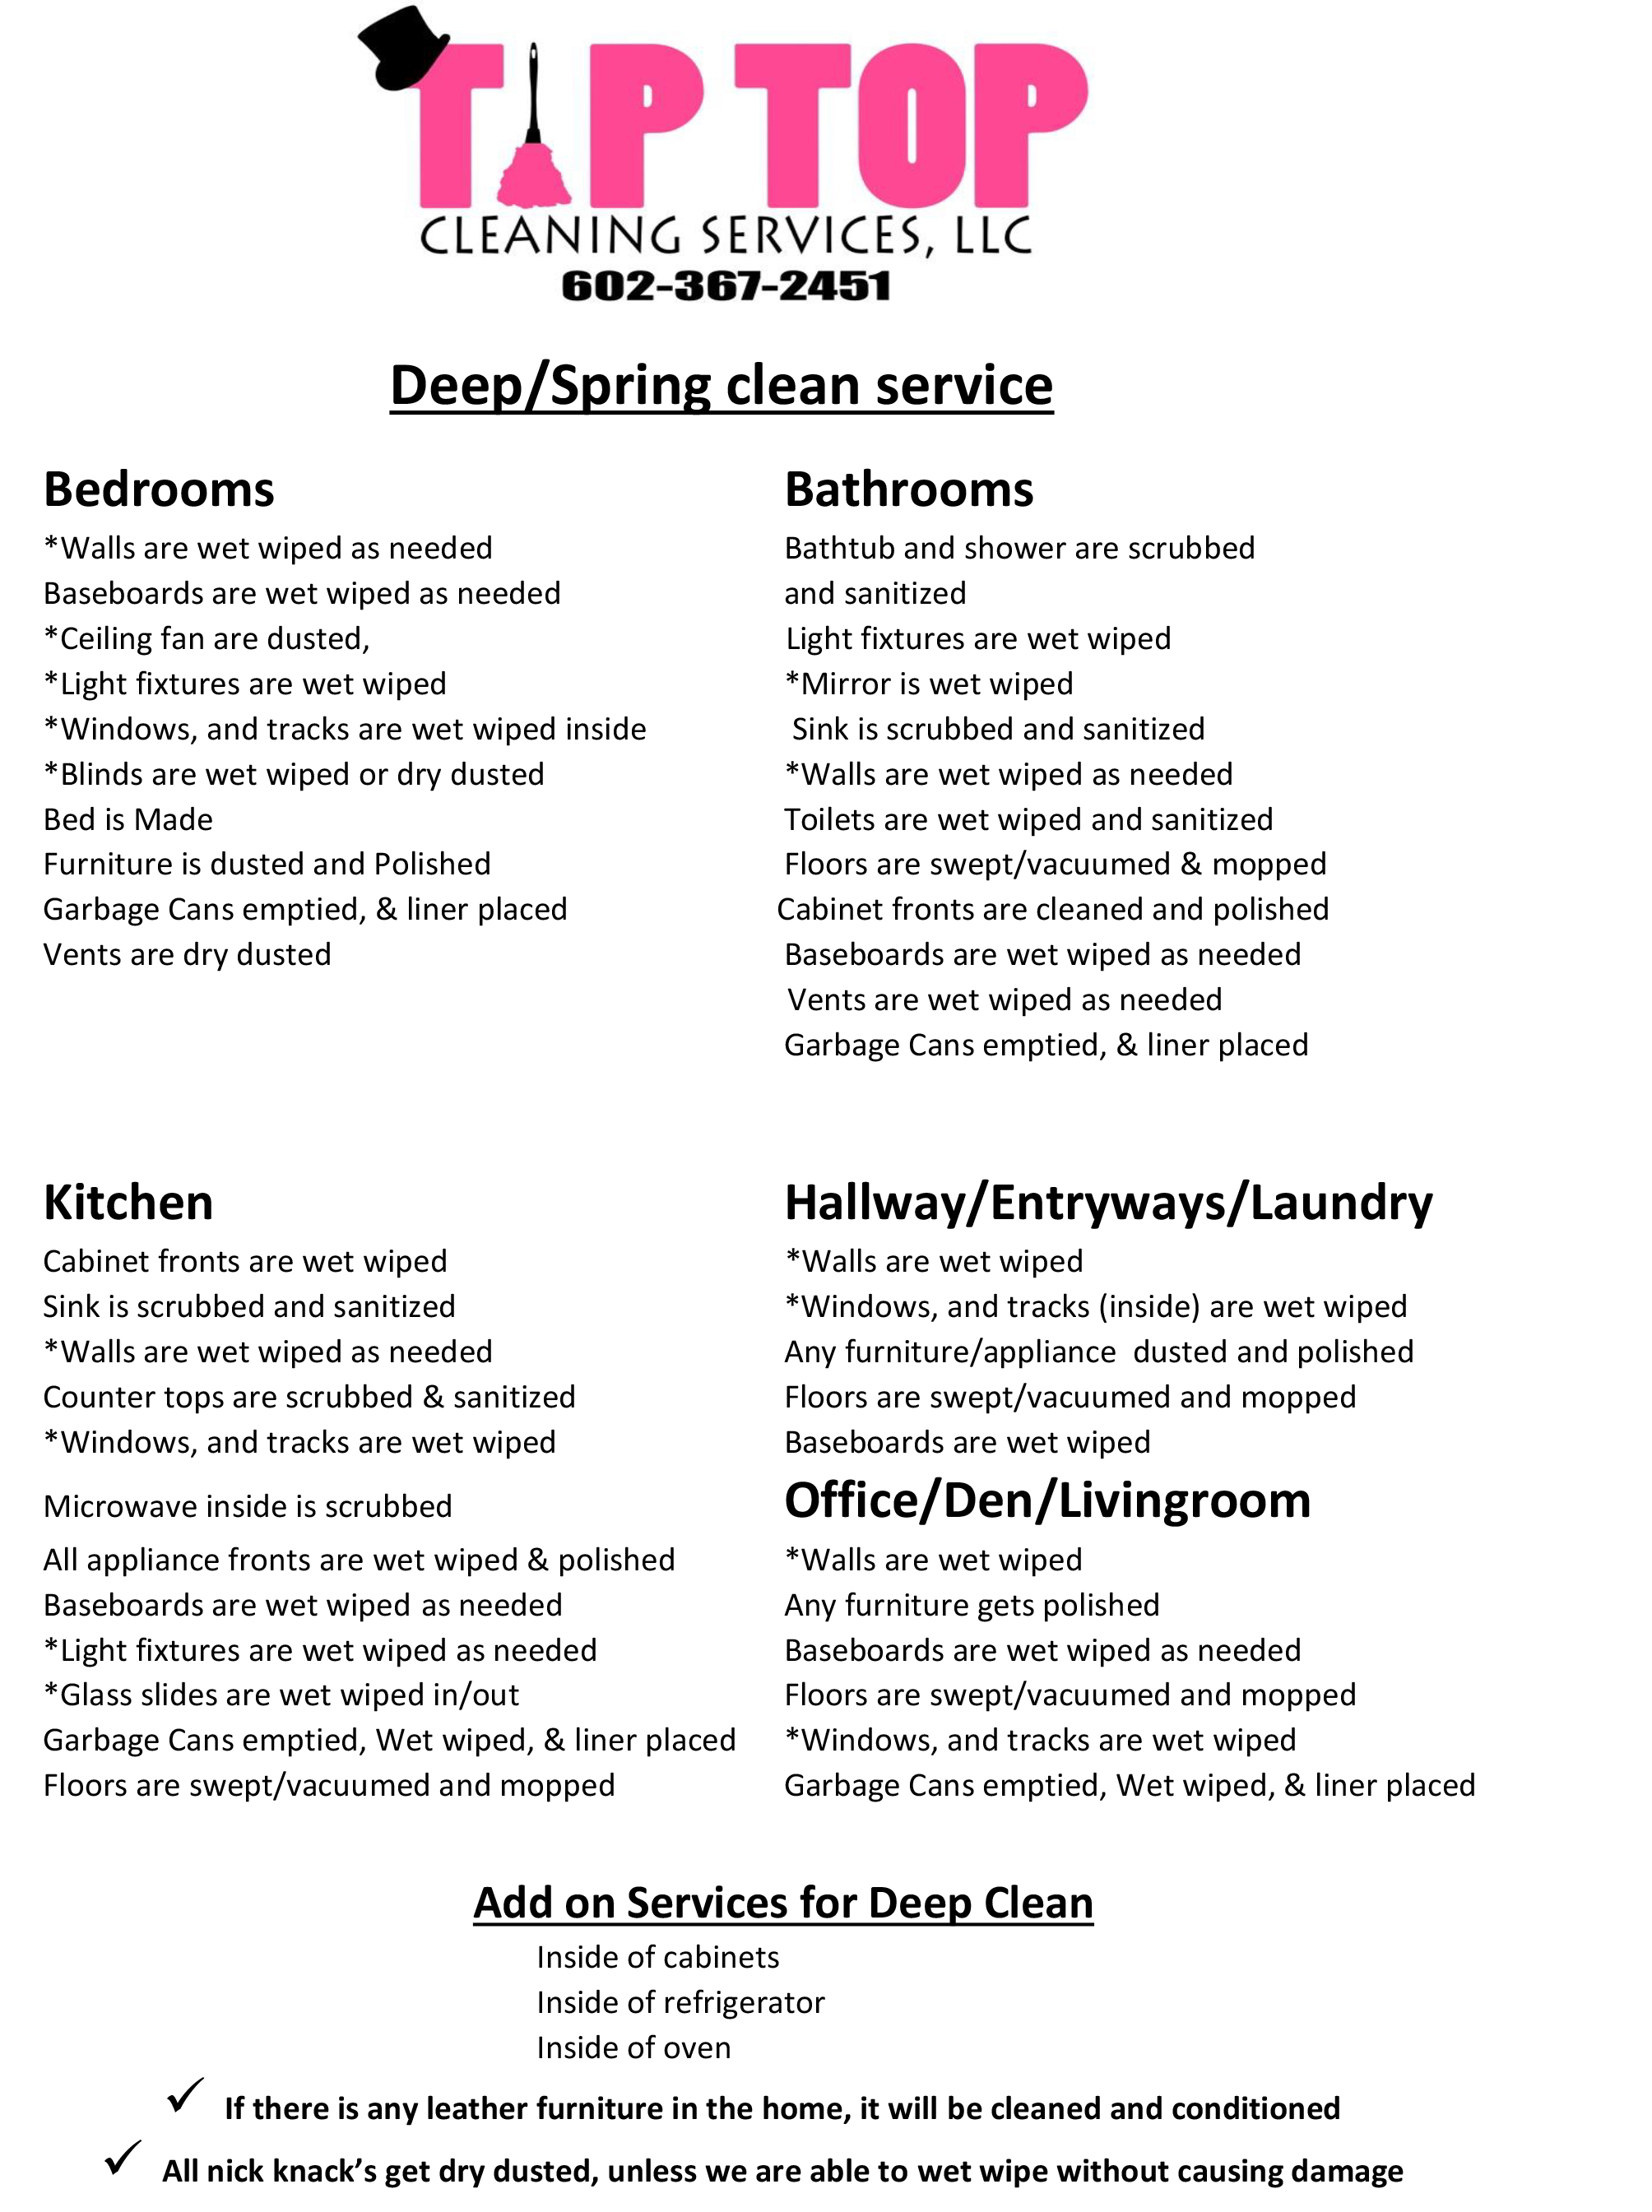 Refrigerator Cleaning Services